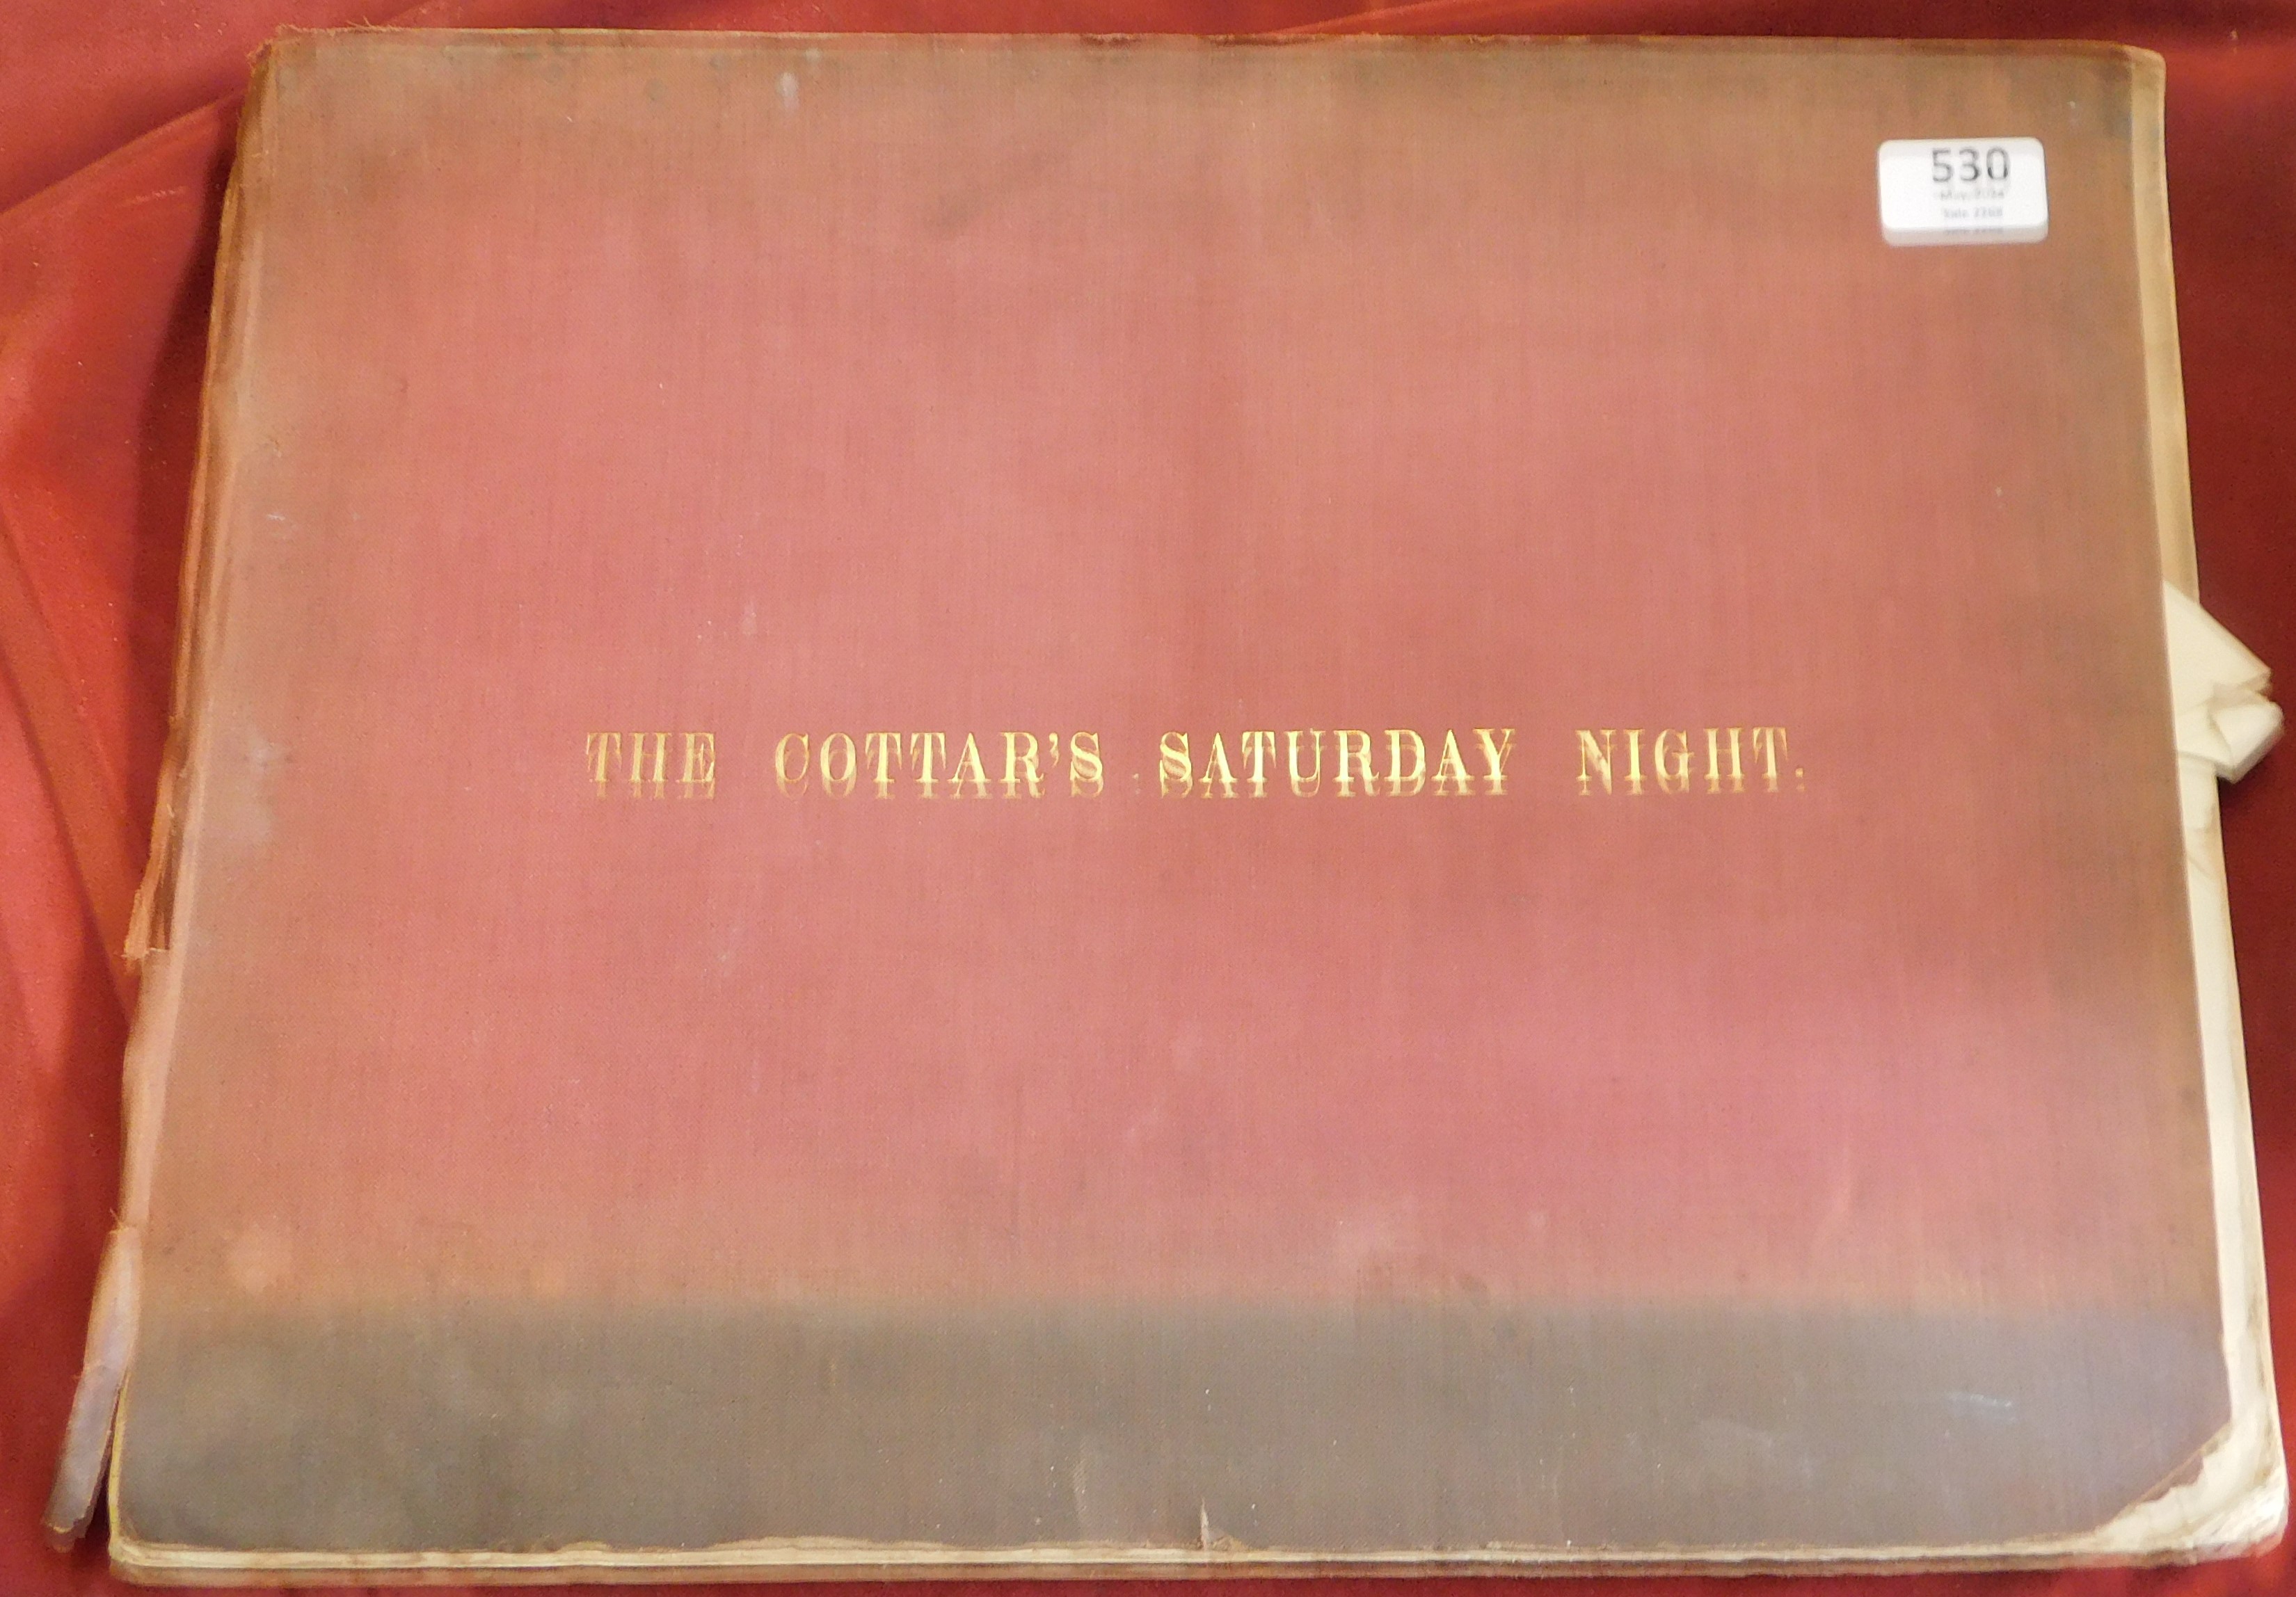 The Cottar's Saturday Night by Robert Burns, dated 1858 the cover is in poor condition.